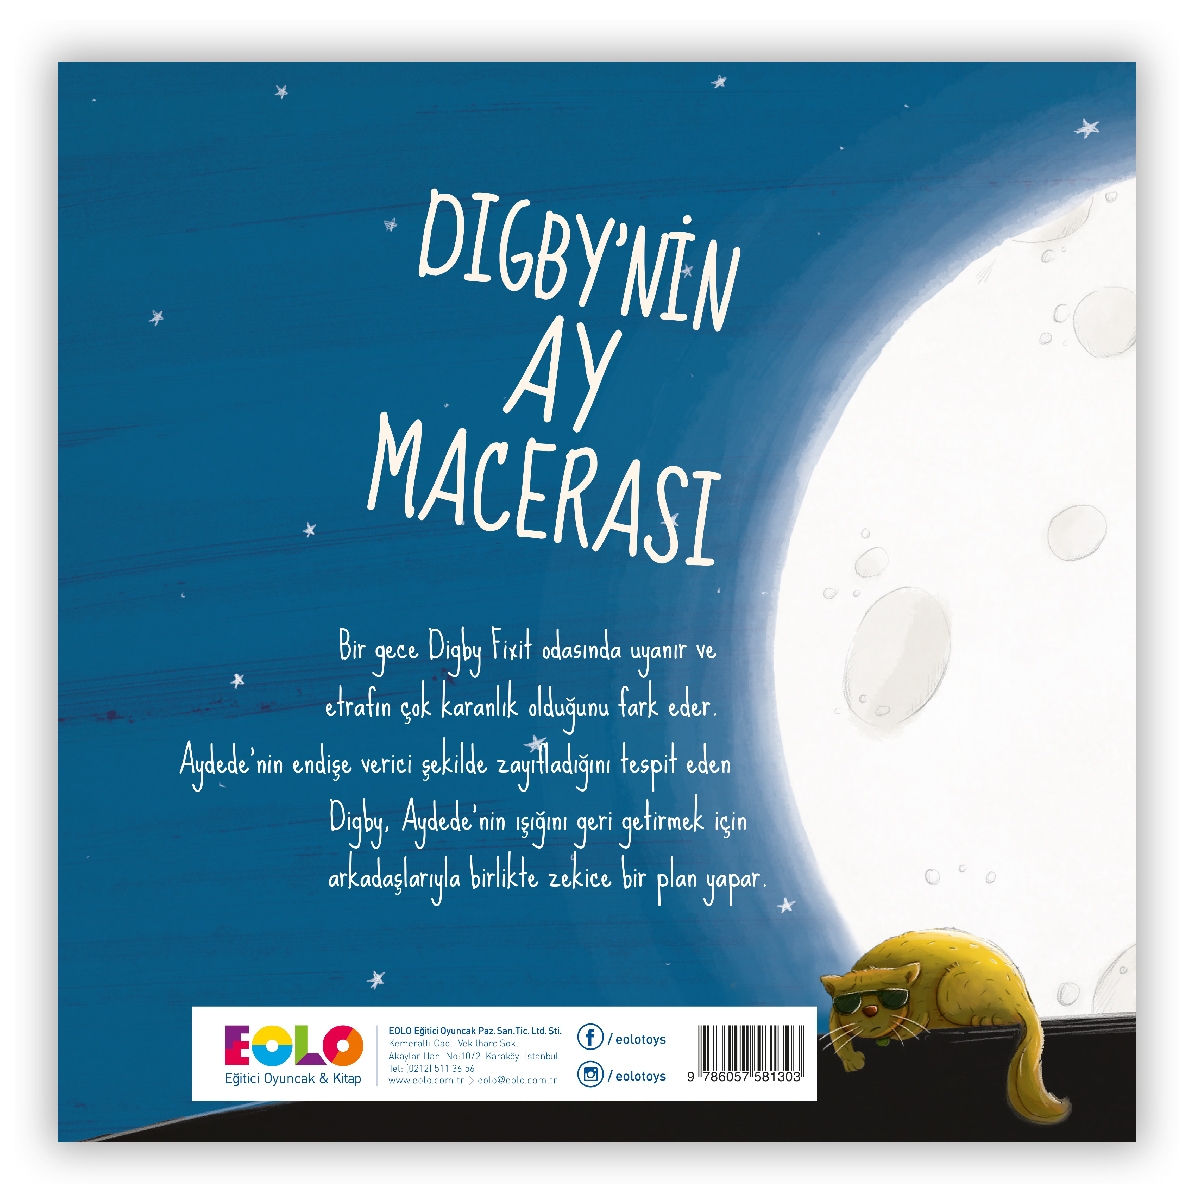 Digby’s Moon Mission